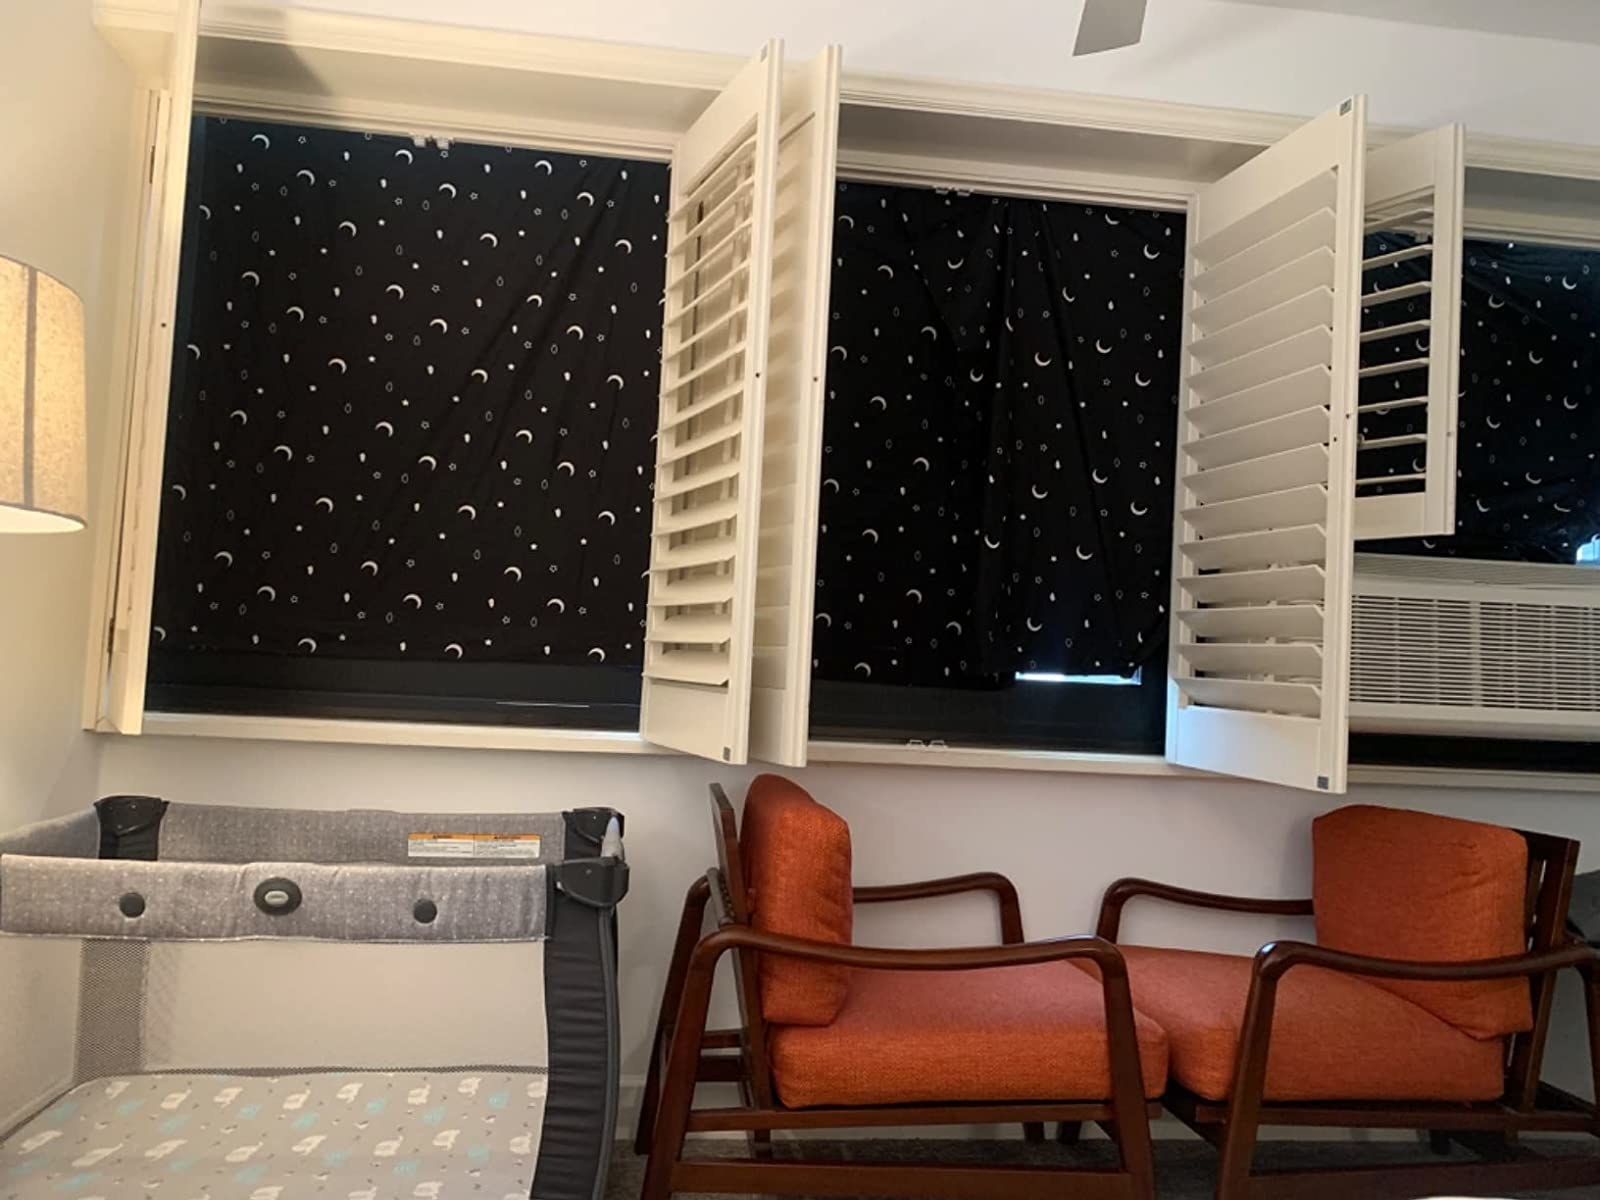 Reviewer photo of curtains hanging in windows